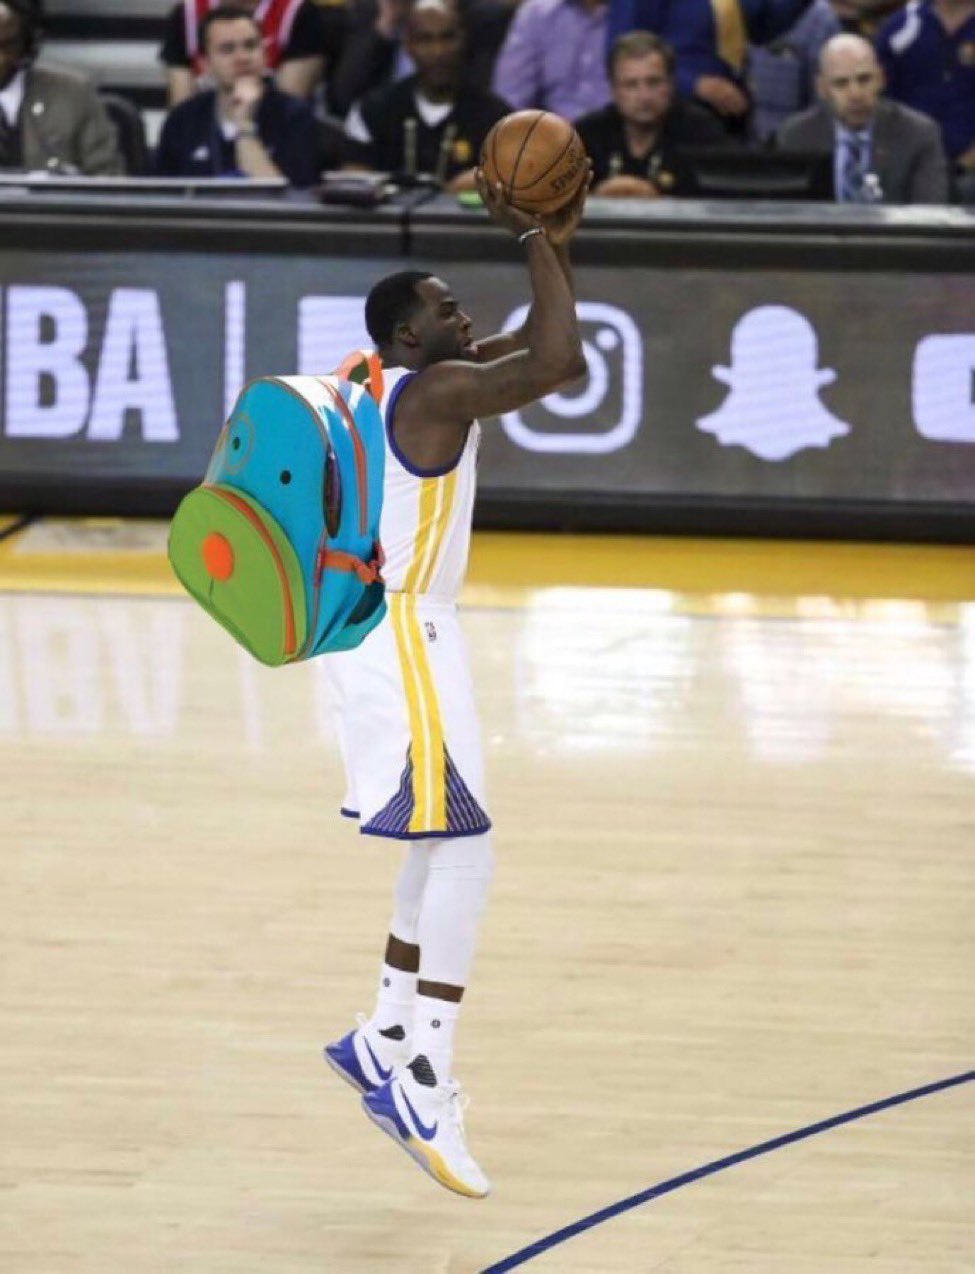 redactioneel Trouwens baden NBA Retweet on Twitter: "Draymond Green with the backpack three tonight. 😂  https://t.co/qREfdk0F9b" / Twitter